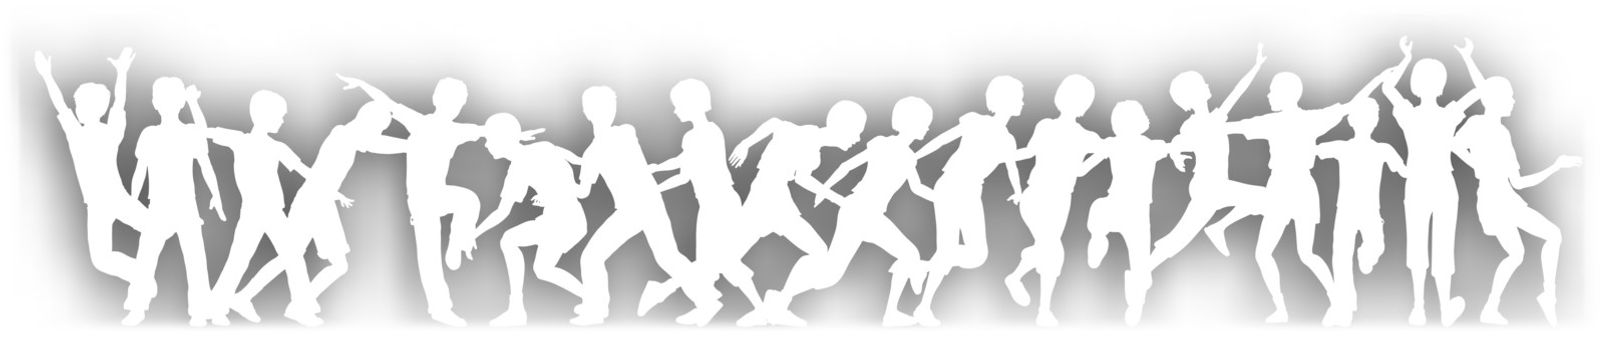 Editable vector cutout of children playing with background shadow made using a gradient mesh